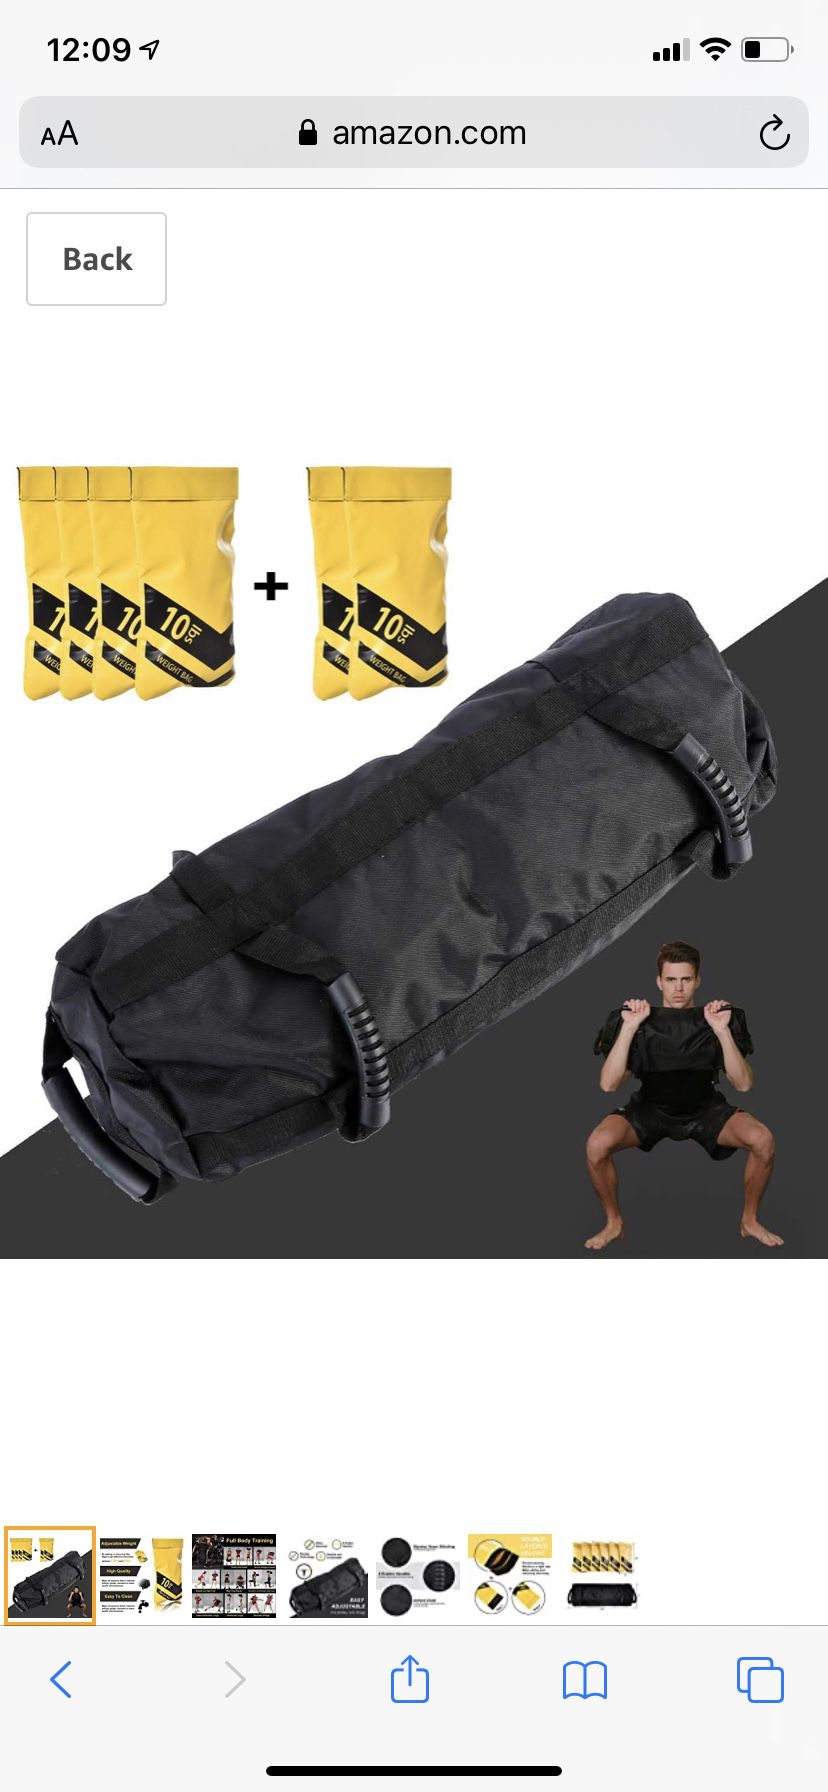 Estleys Workout Sandbag for Fitness 10 to 40 Lbs, Adjustable Military Sandbags with 4 and 2 Inner Bags, Training Weight Bags, Full Body Exercise Equi